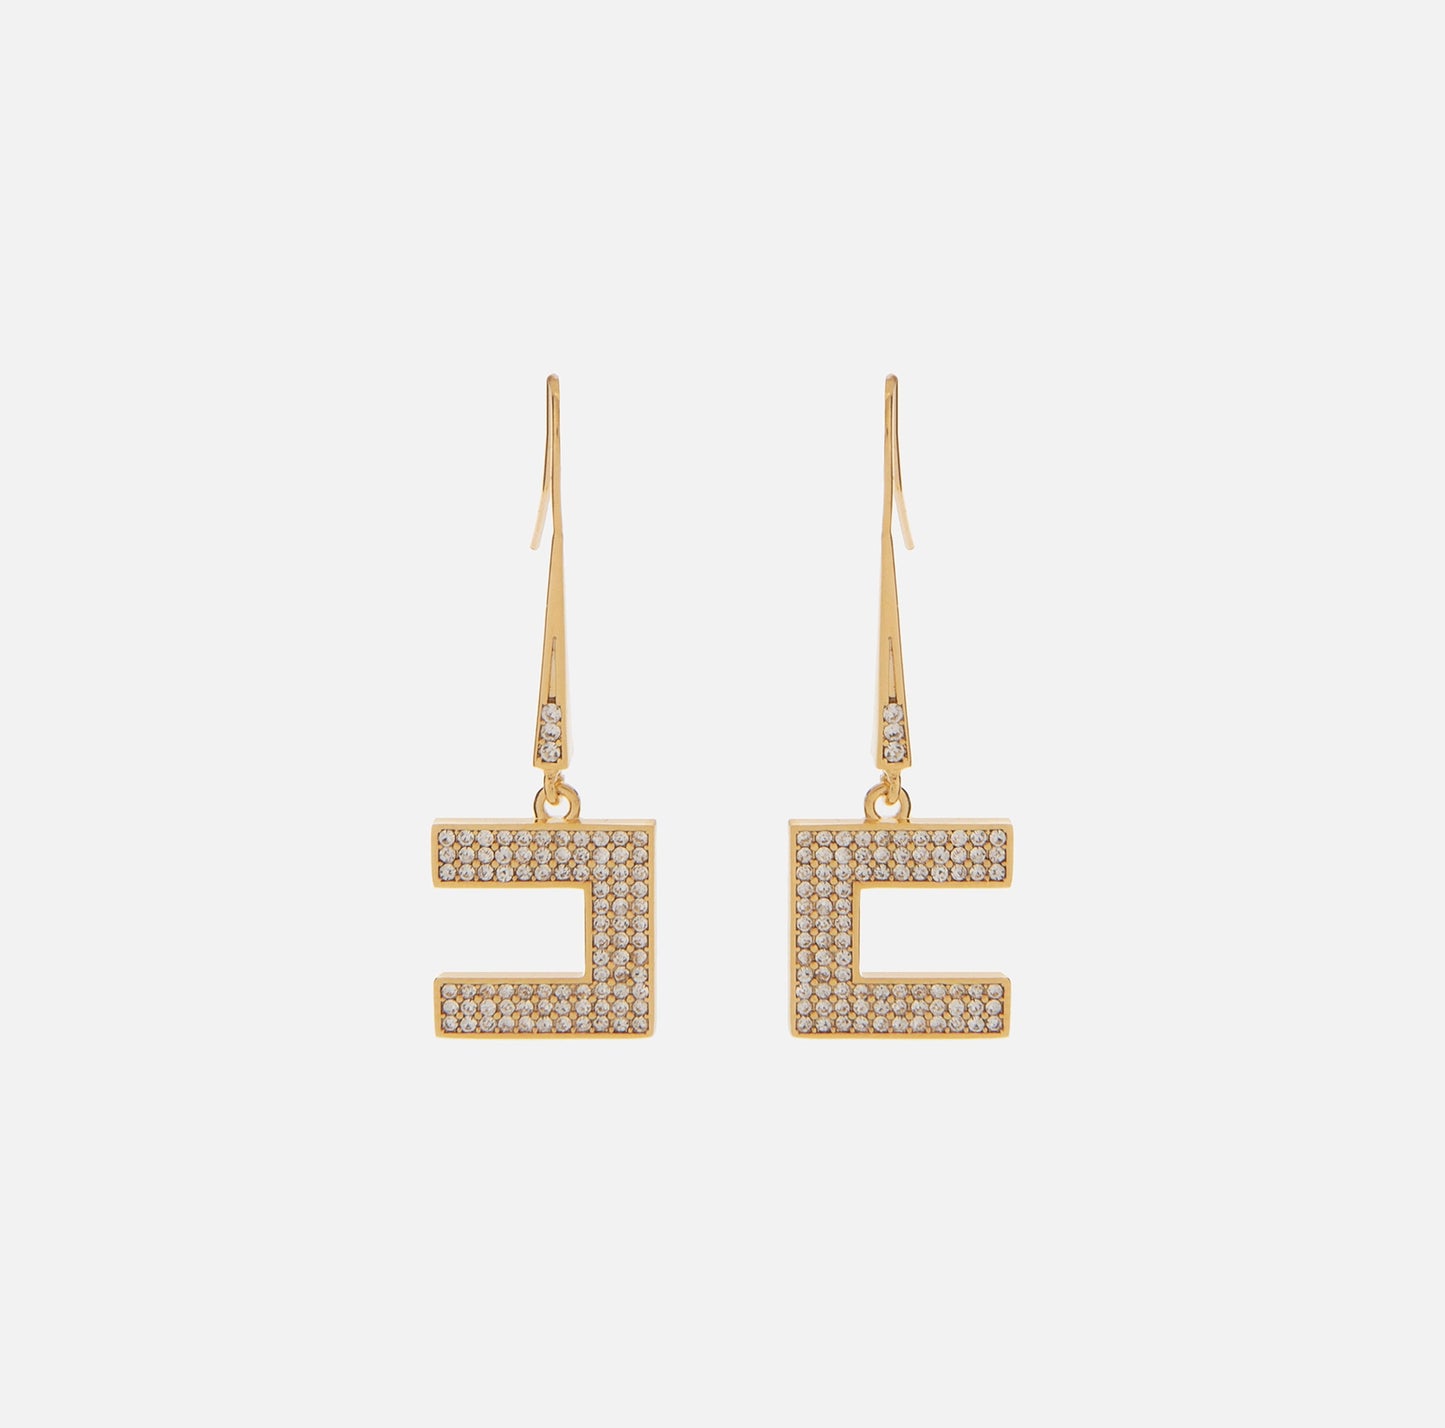 Earrings with logo and rhinestones